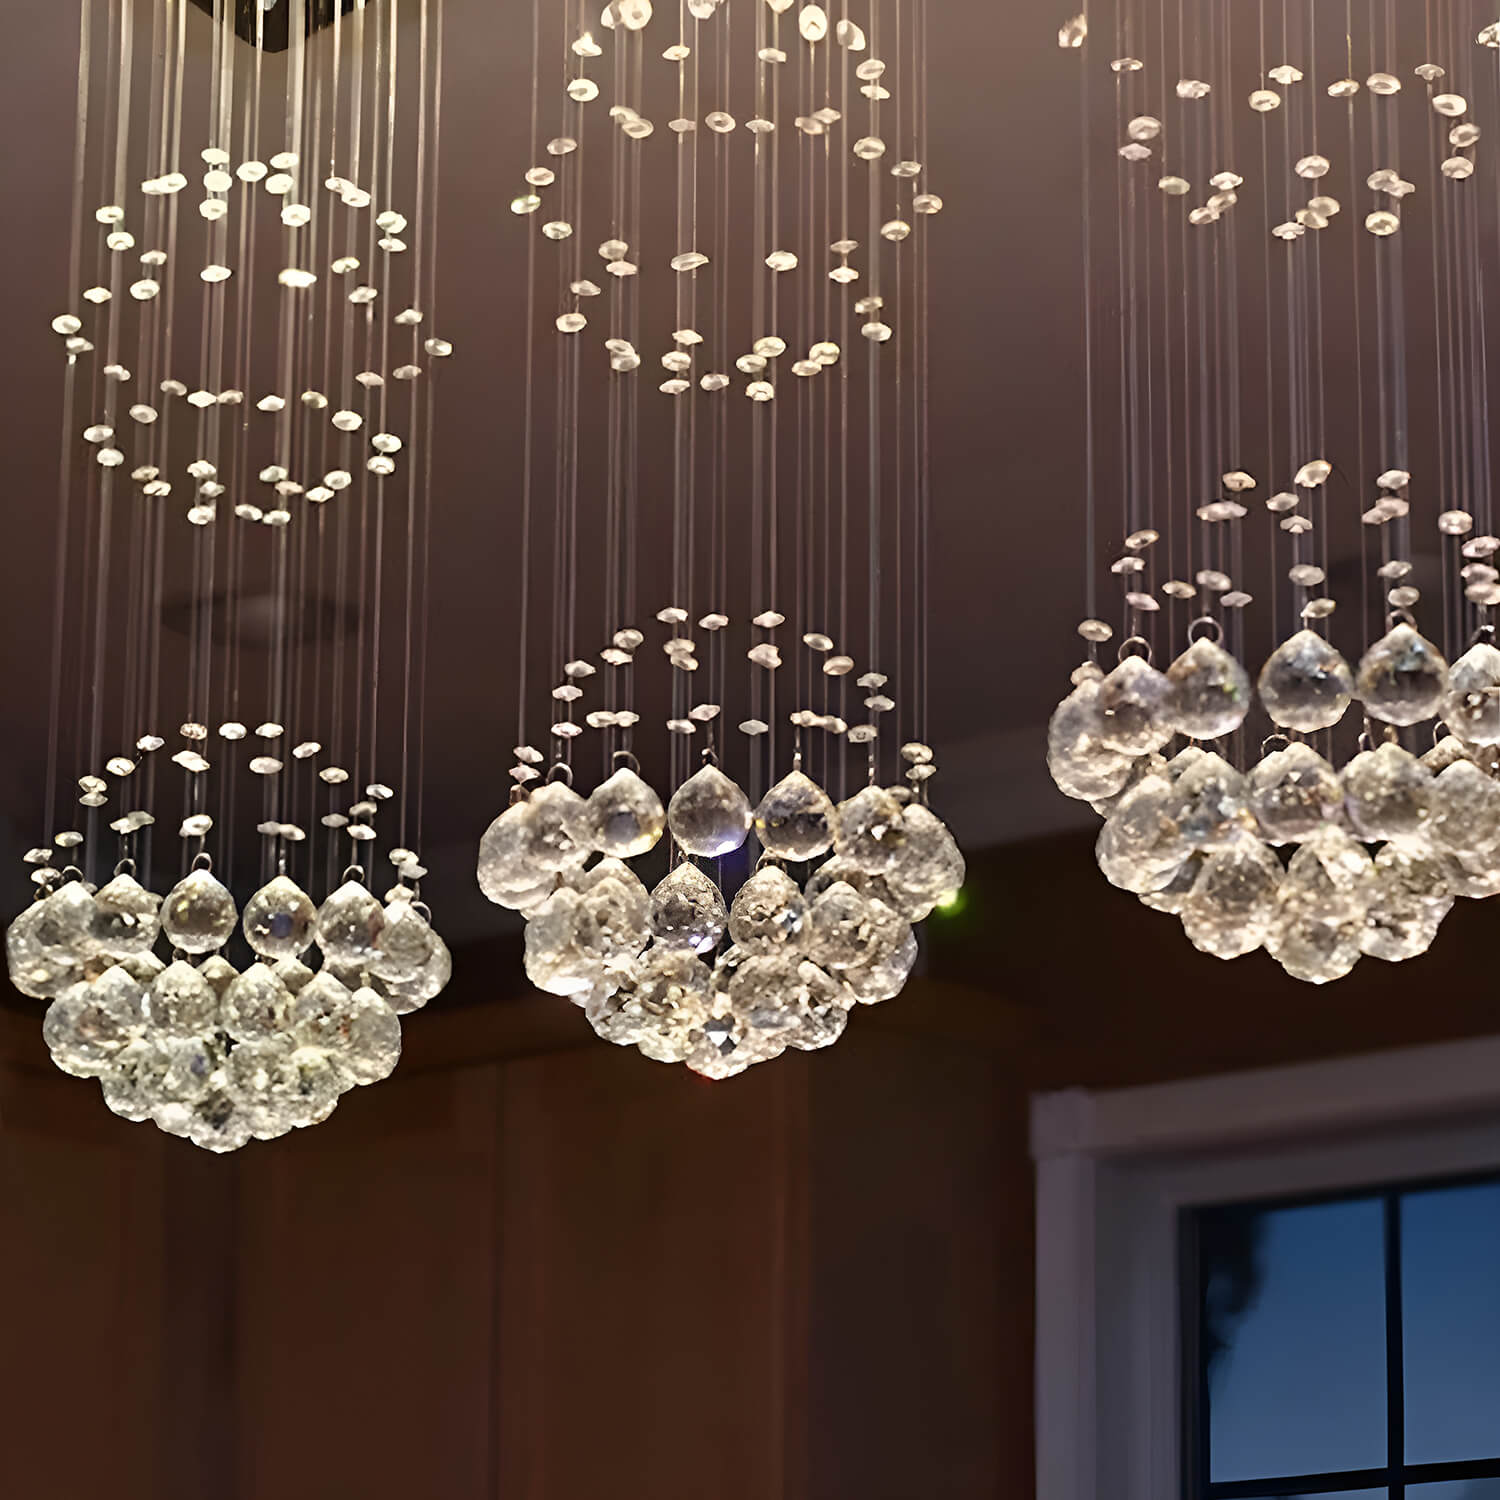  Contemporary Island Crystal Raindrop Chandelier - Dining Room Ceiling Light-details-3 |Sofary